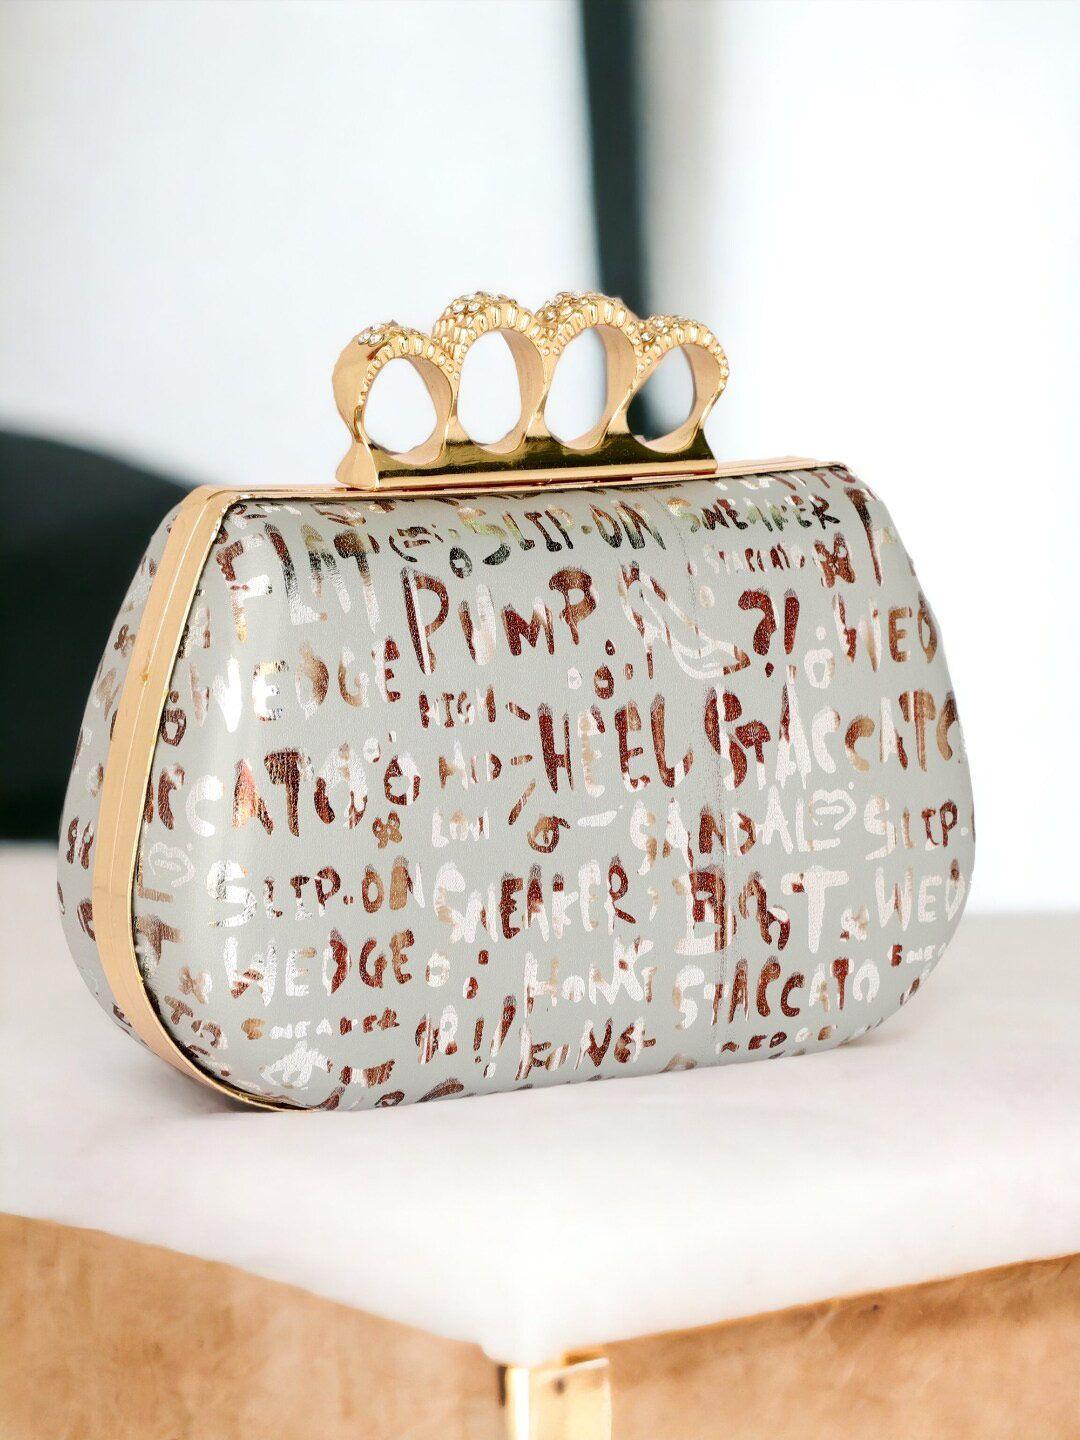 toobacraft printed box clutch